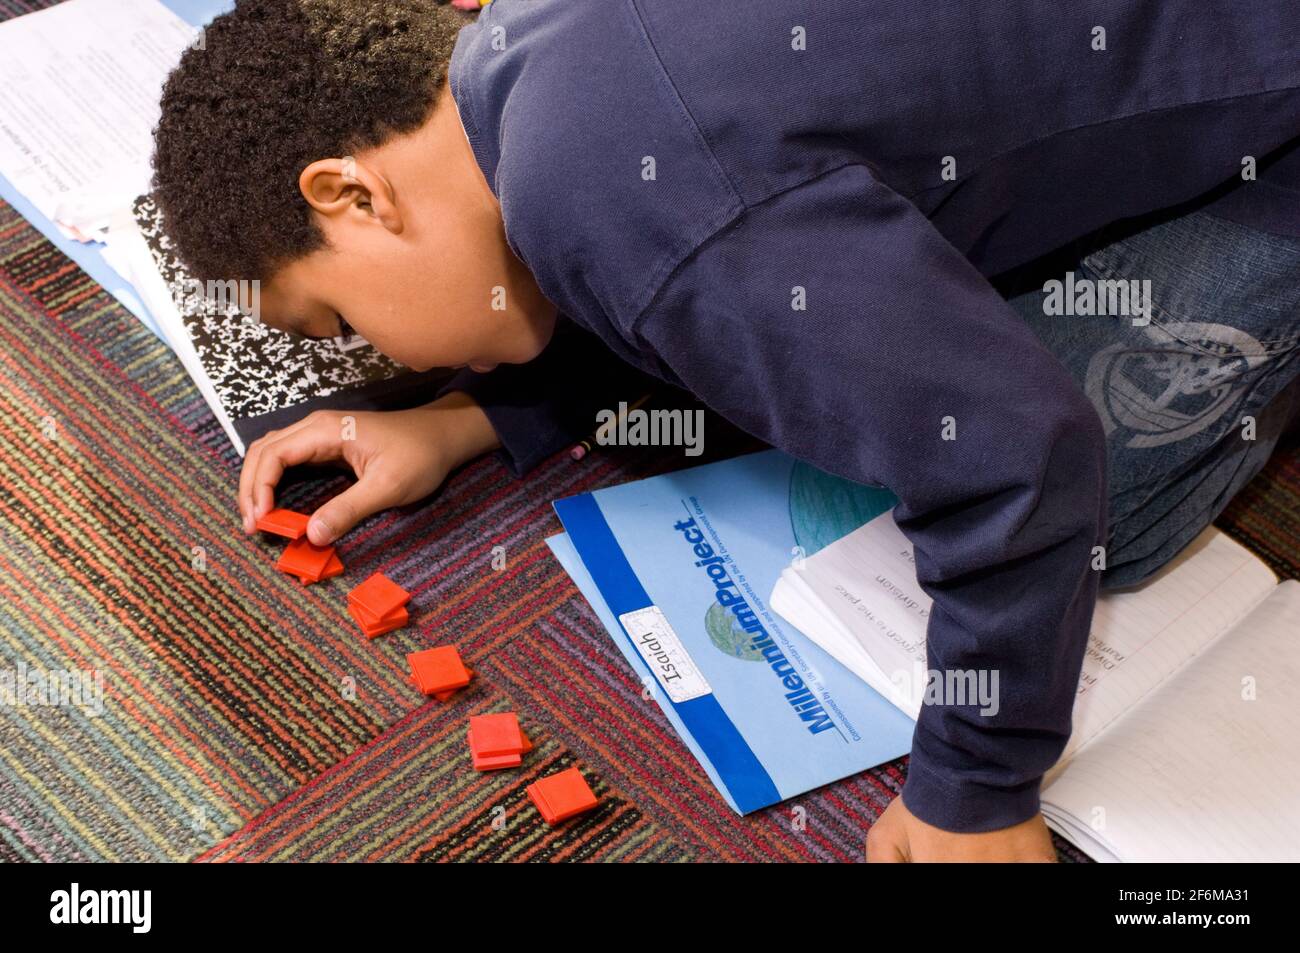 Independent elementary school Grade 4 ages 9-10 mathematics boy working with manipulatives Stock Photo